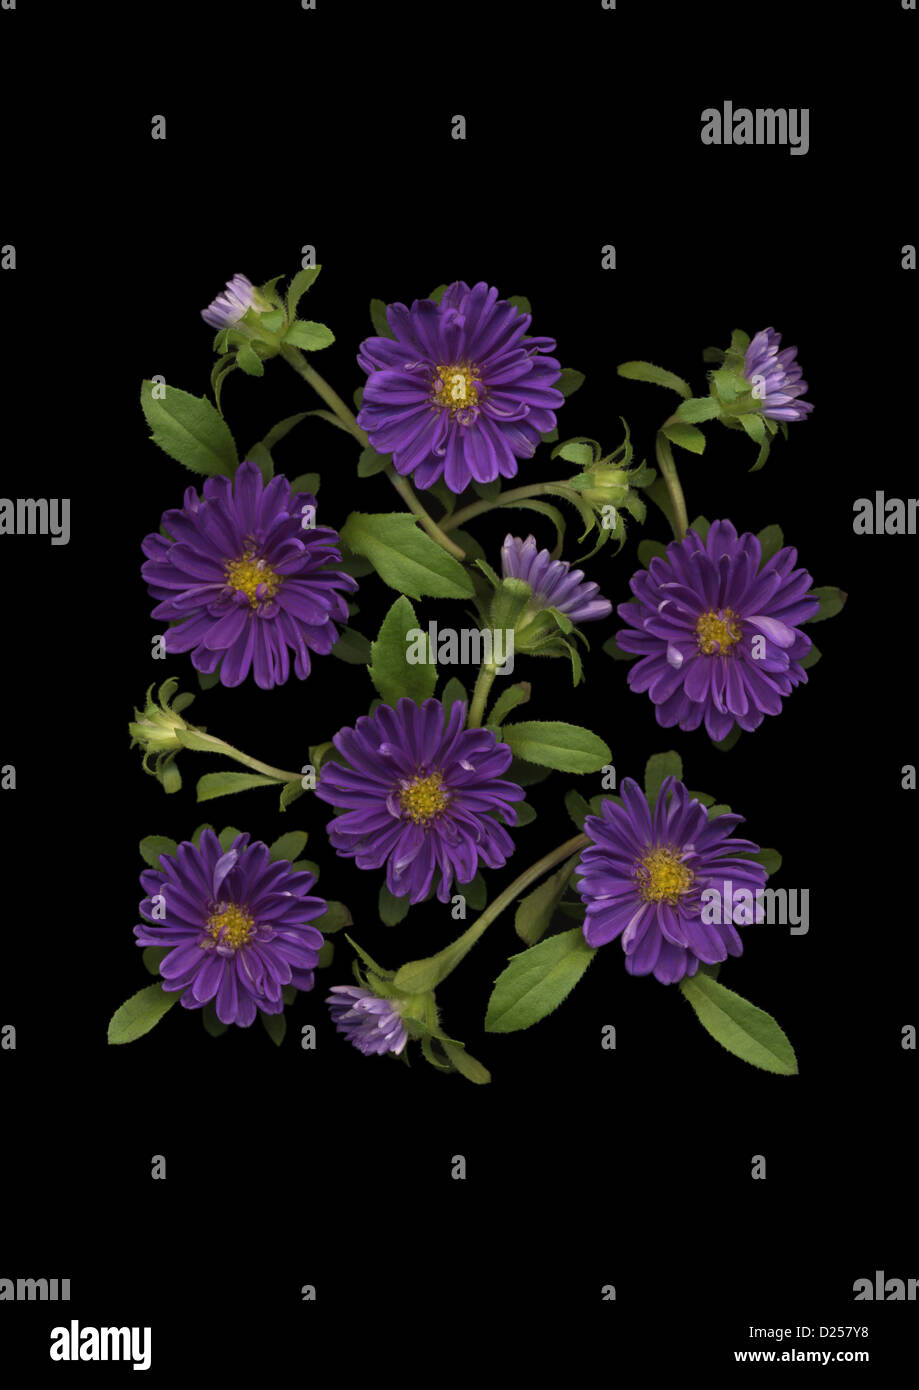 China Aster flowers on black background Stock Photo